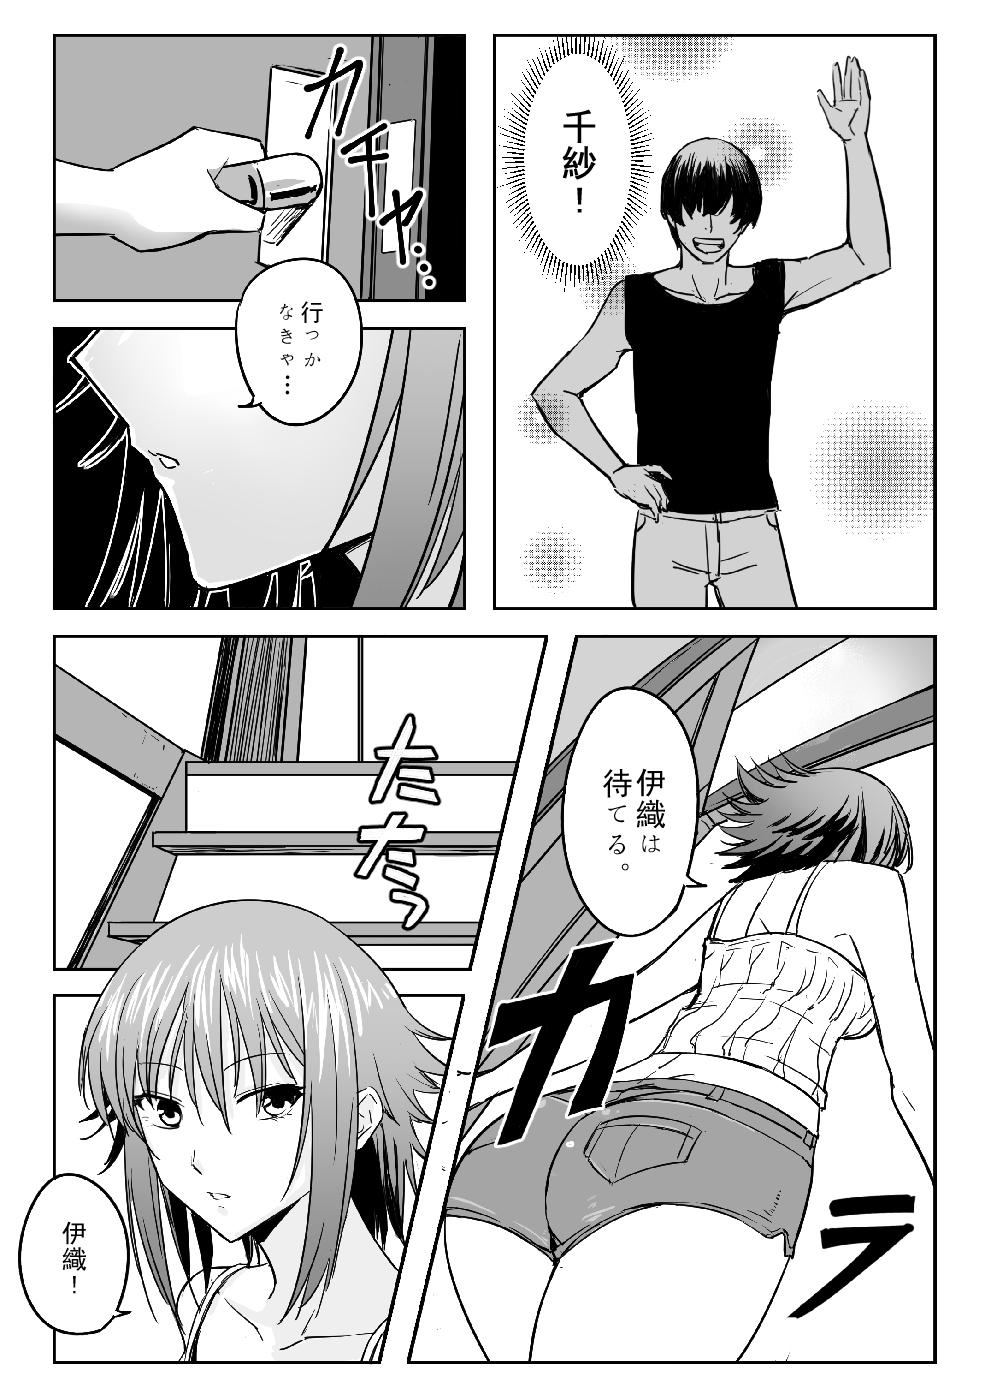 Nudes Chika-chan is a goodbye! - Grand blue Amateurs - Page 5